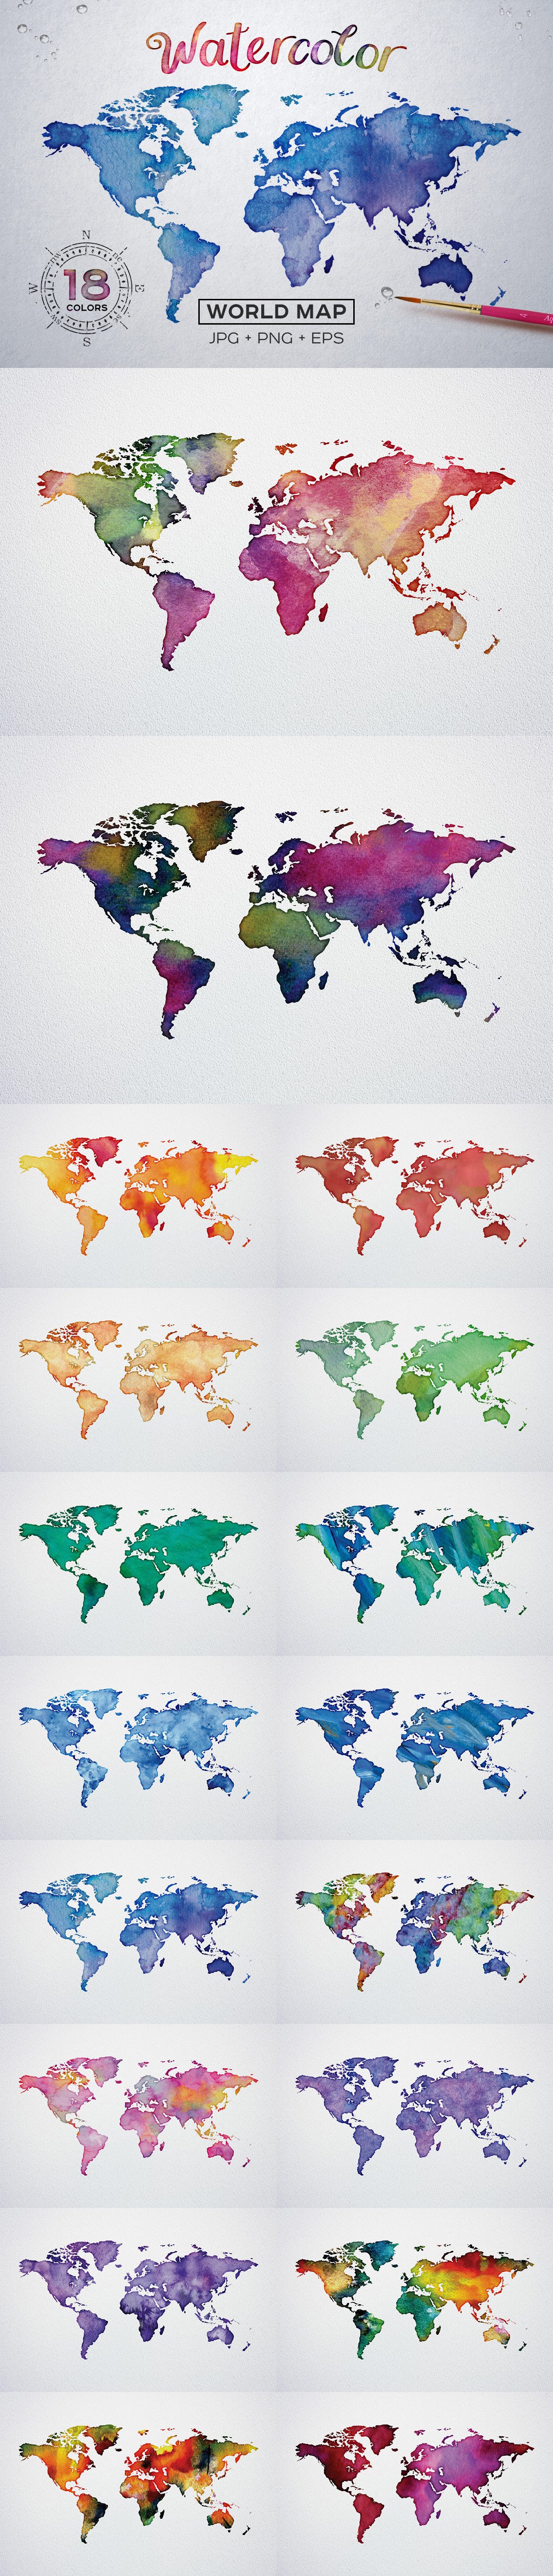 watercolor world maps jpgepspng view 584